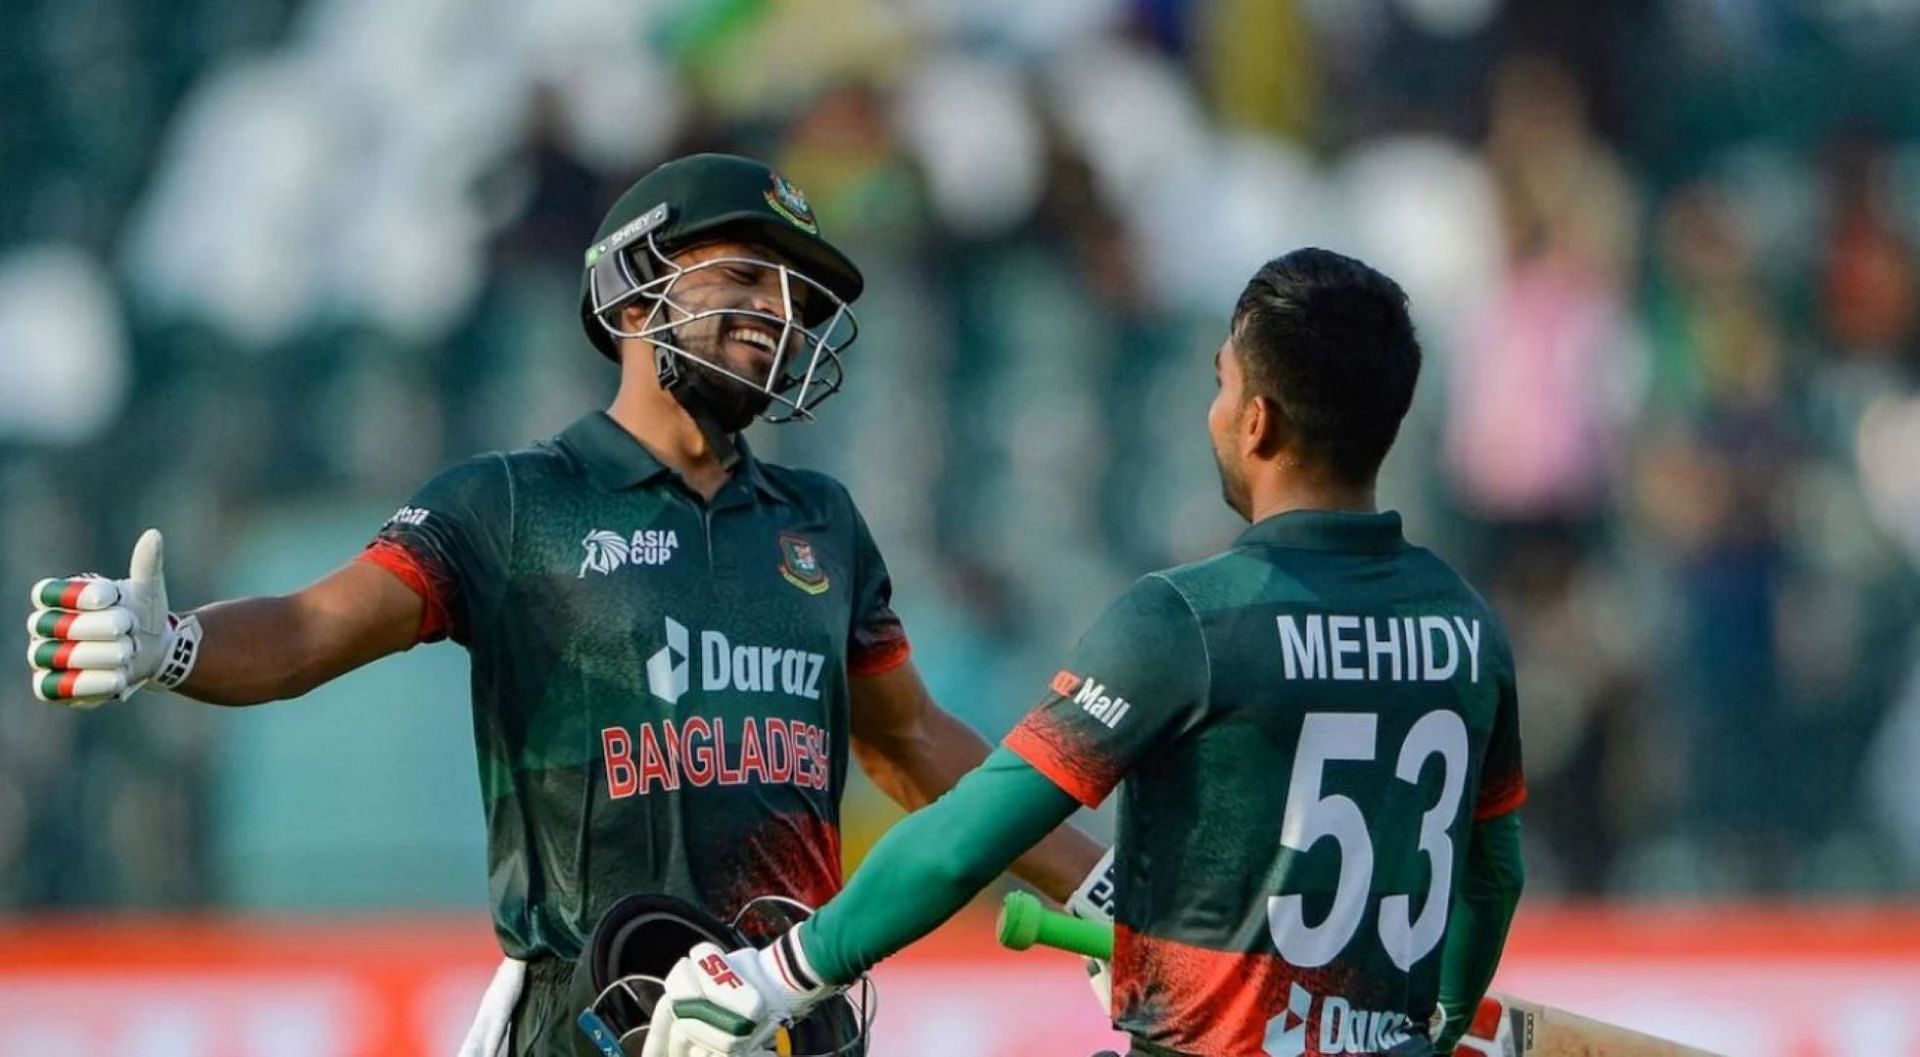 Najmul Shanto and Mehidy Hasan destroyed the Afghan bowlers in a double-century partnership.